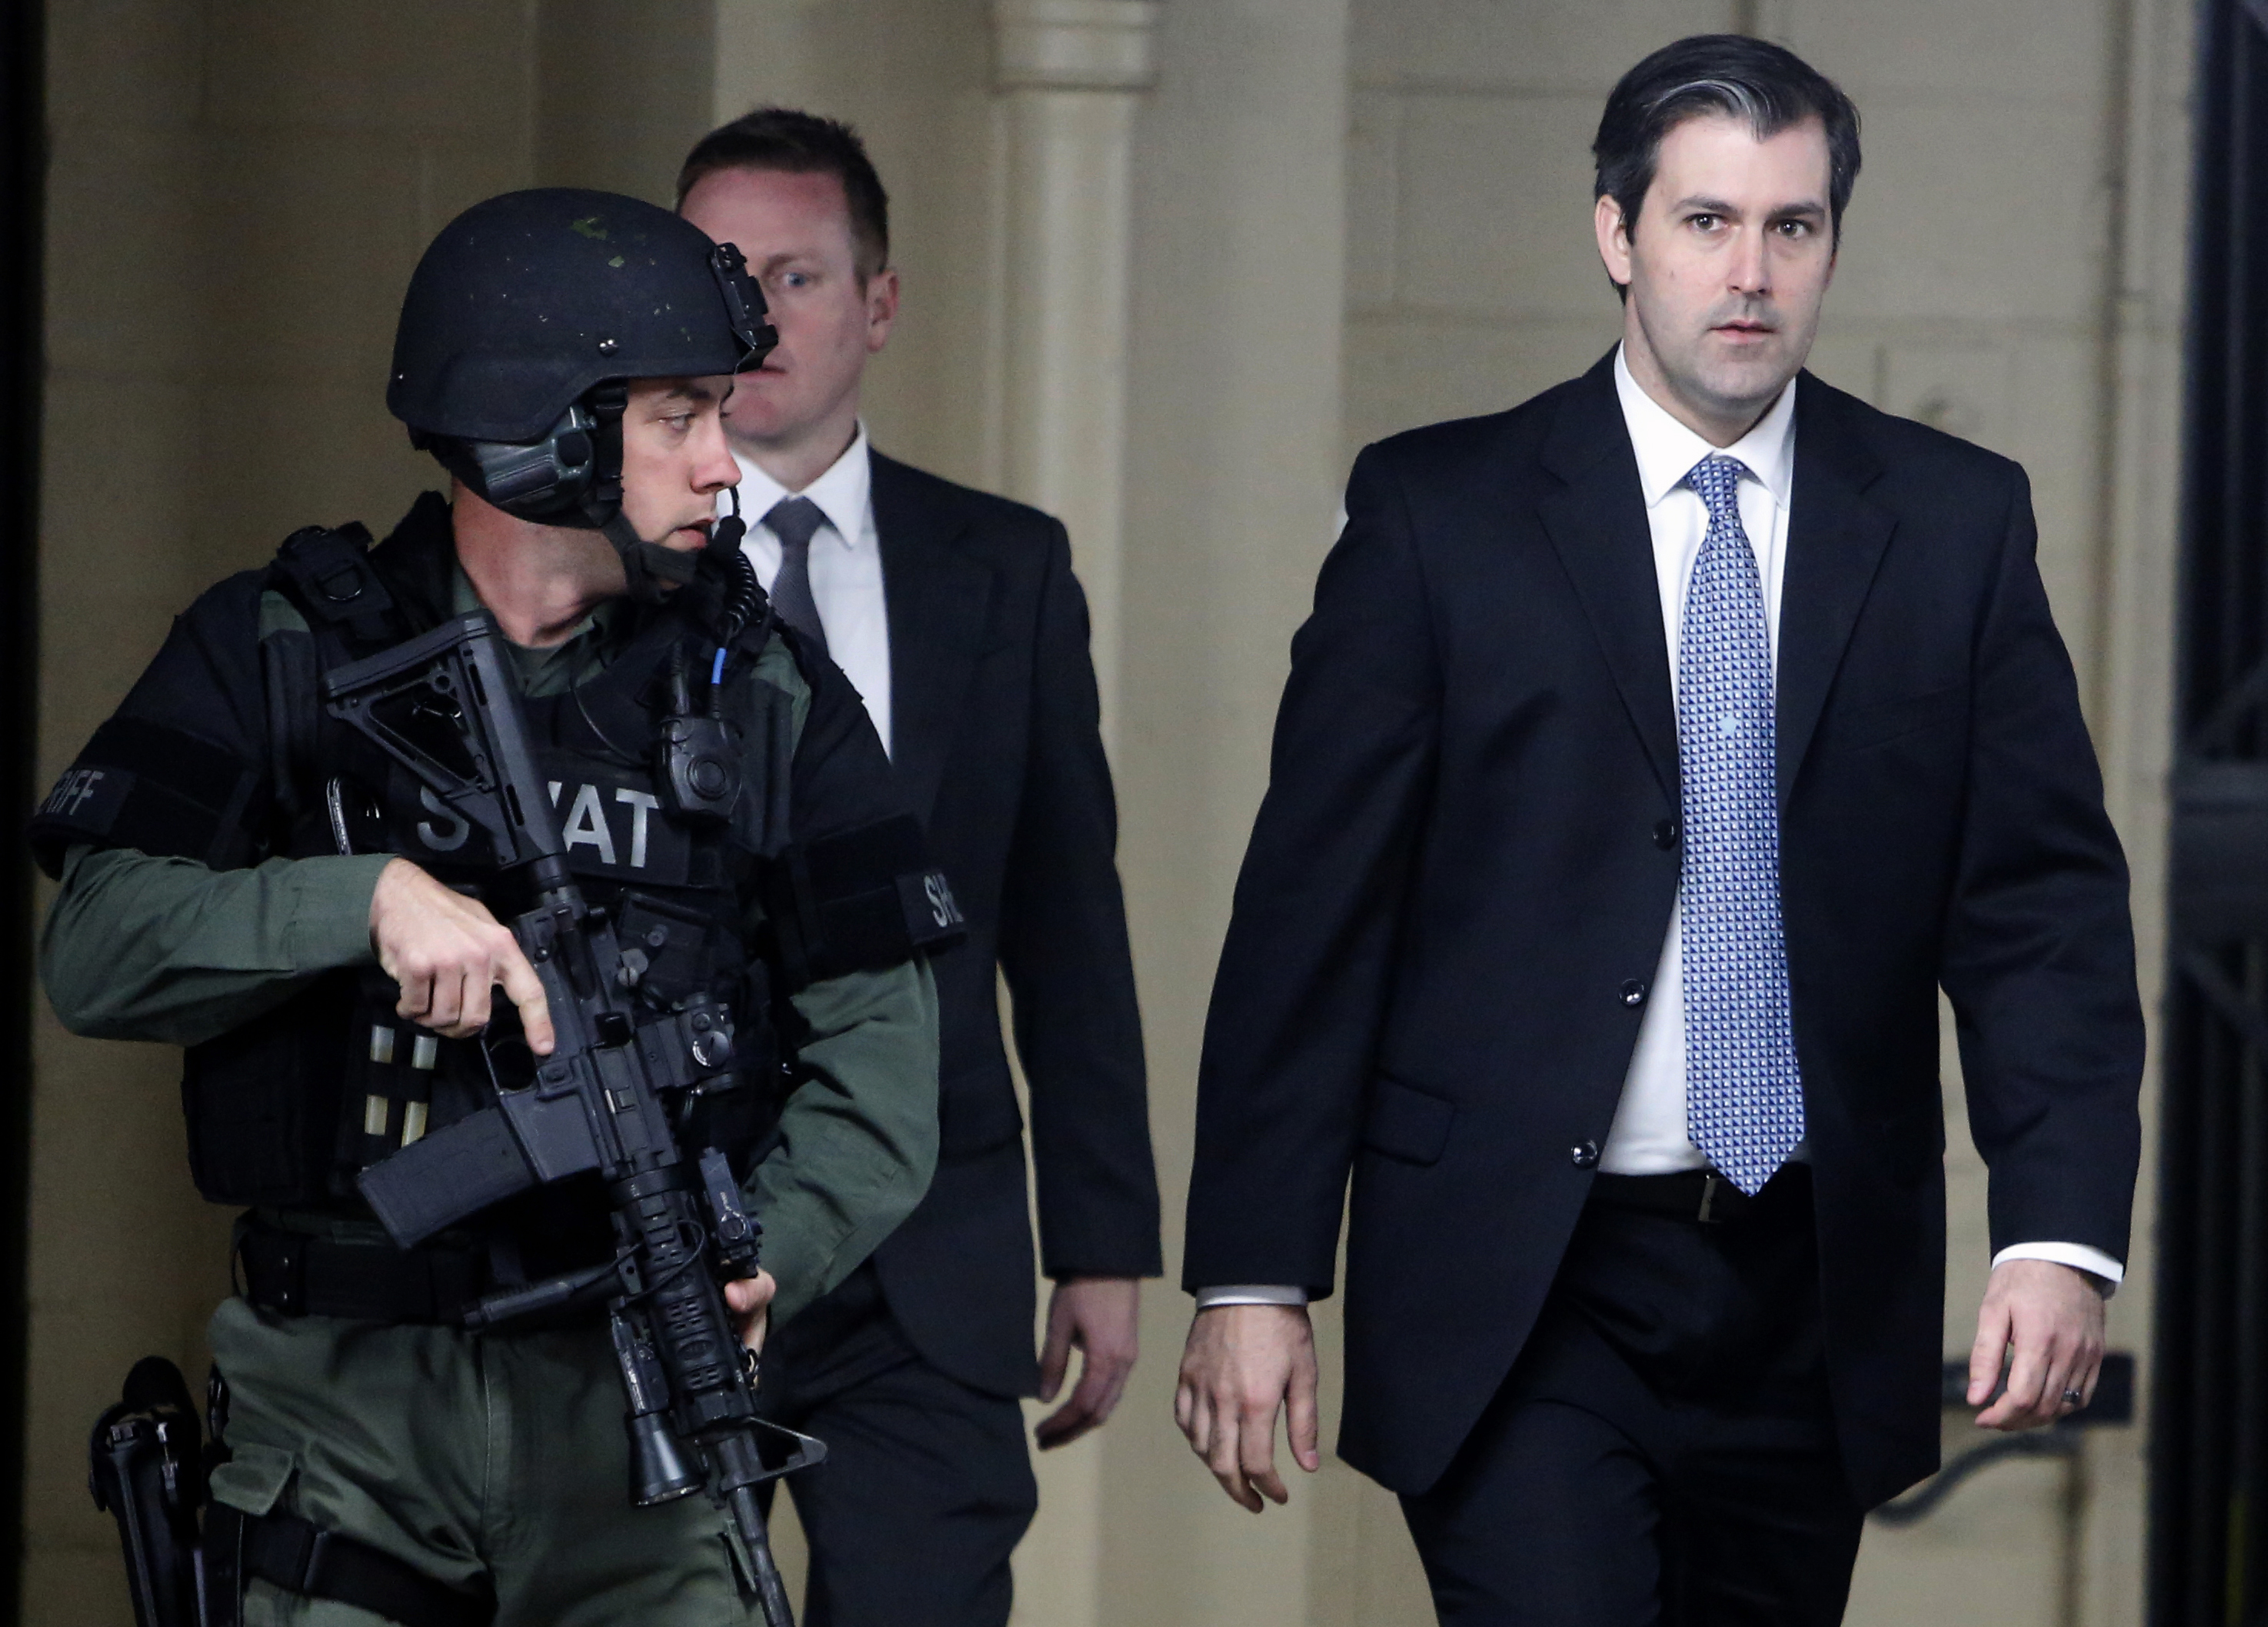 Former South Carolina police officer who shot Walter Scott sentenced to 20 years